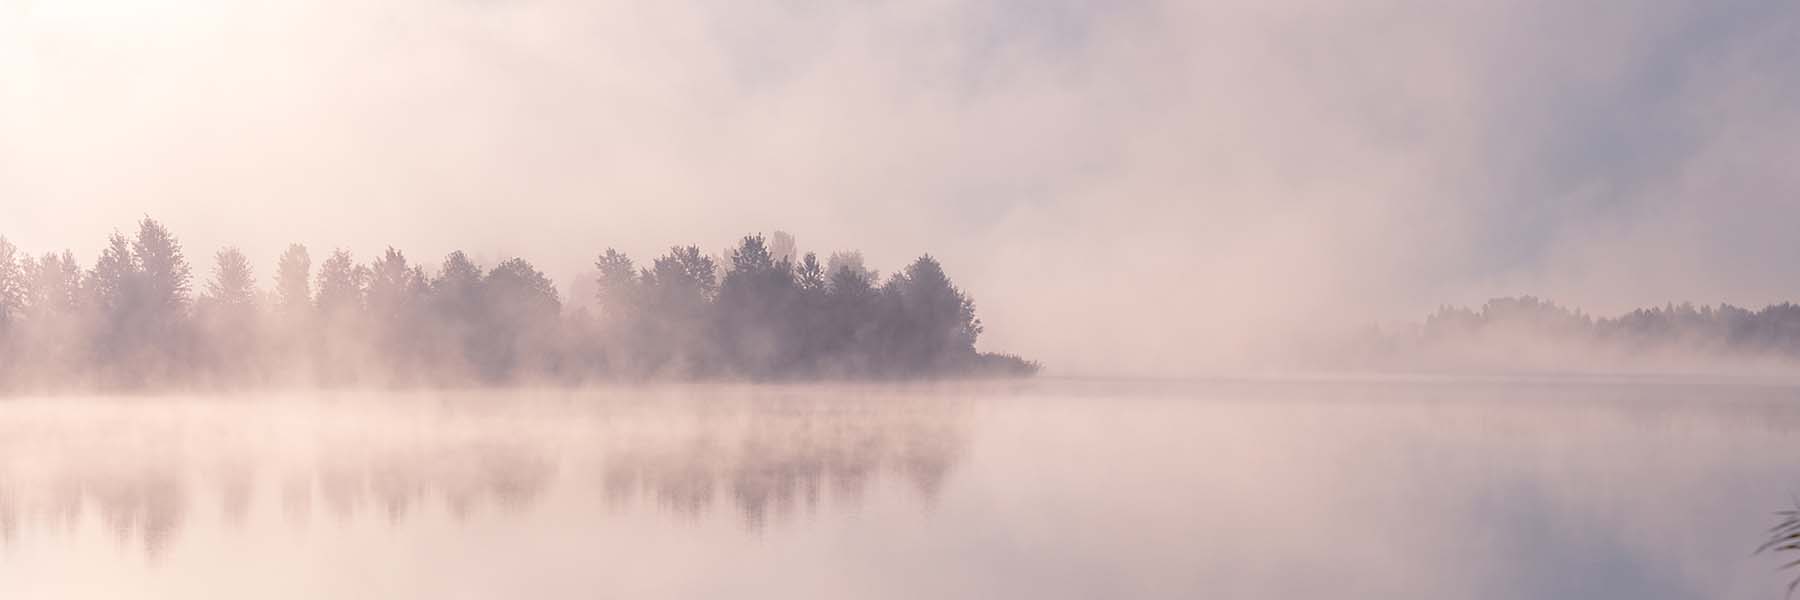 Fog rising up off of the lake casts a pinkish brown hue. A wooded area extends beyond the far side of the lake.